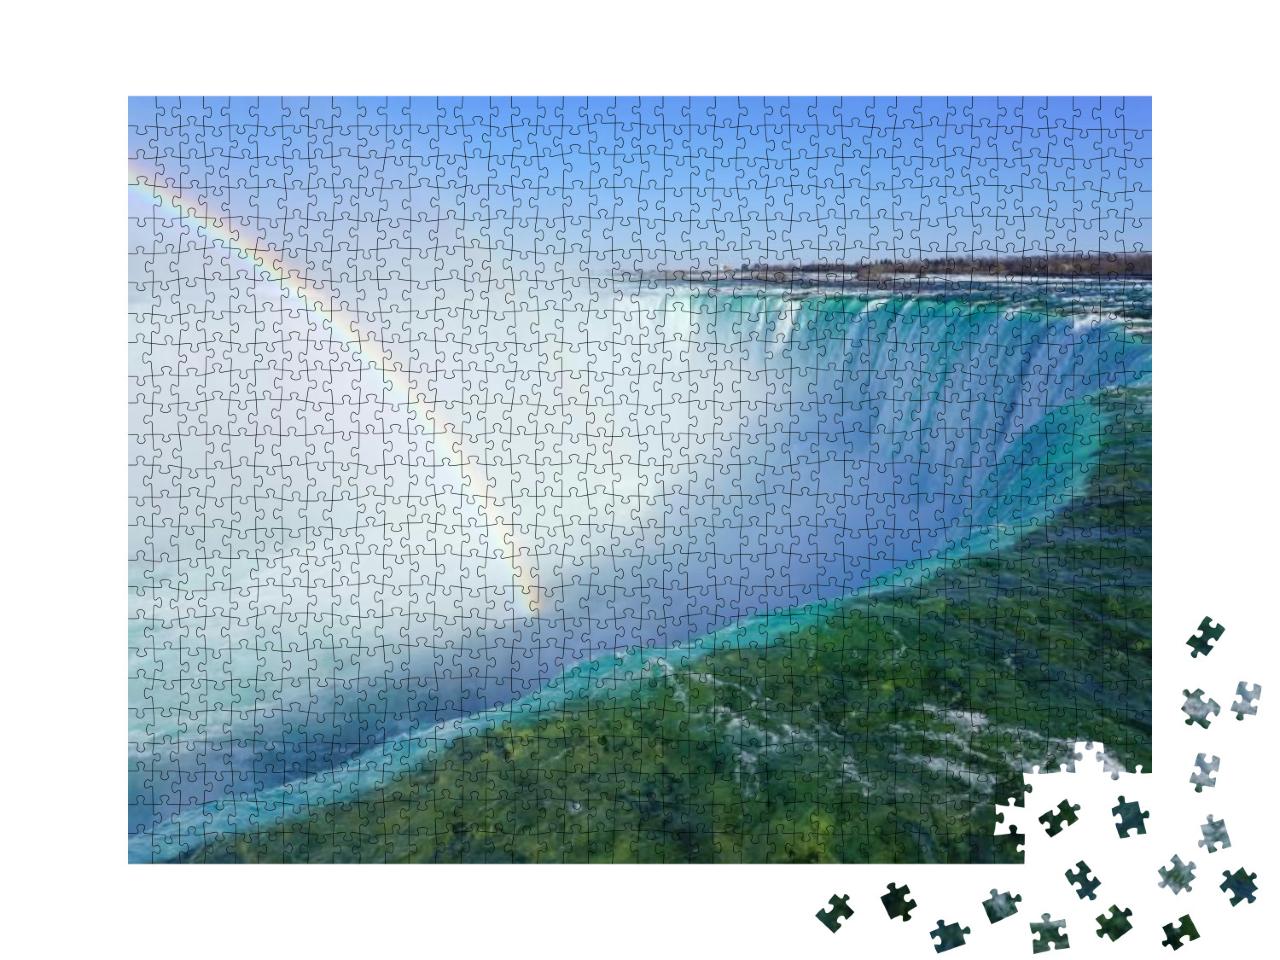 Rainbow Over the Horseshoe Falls Over Frozen Ice & Snow o... Jigsaw Puzzle with 1000 pieces